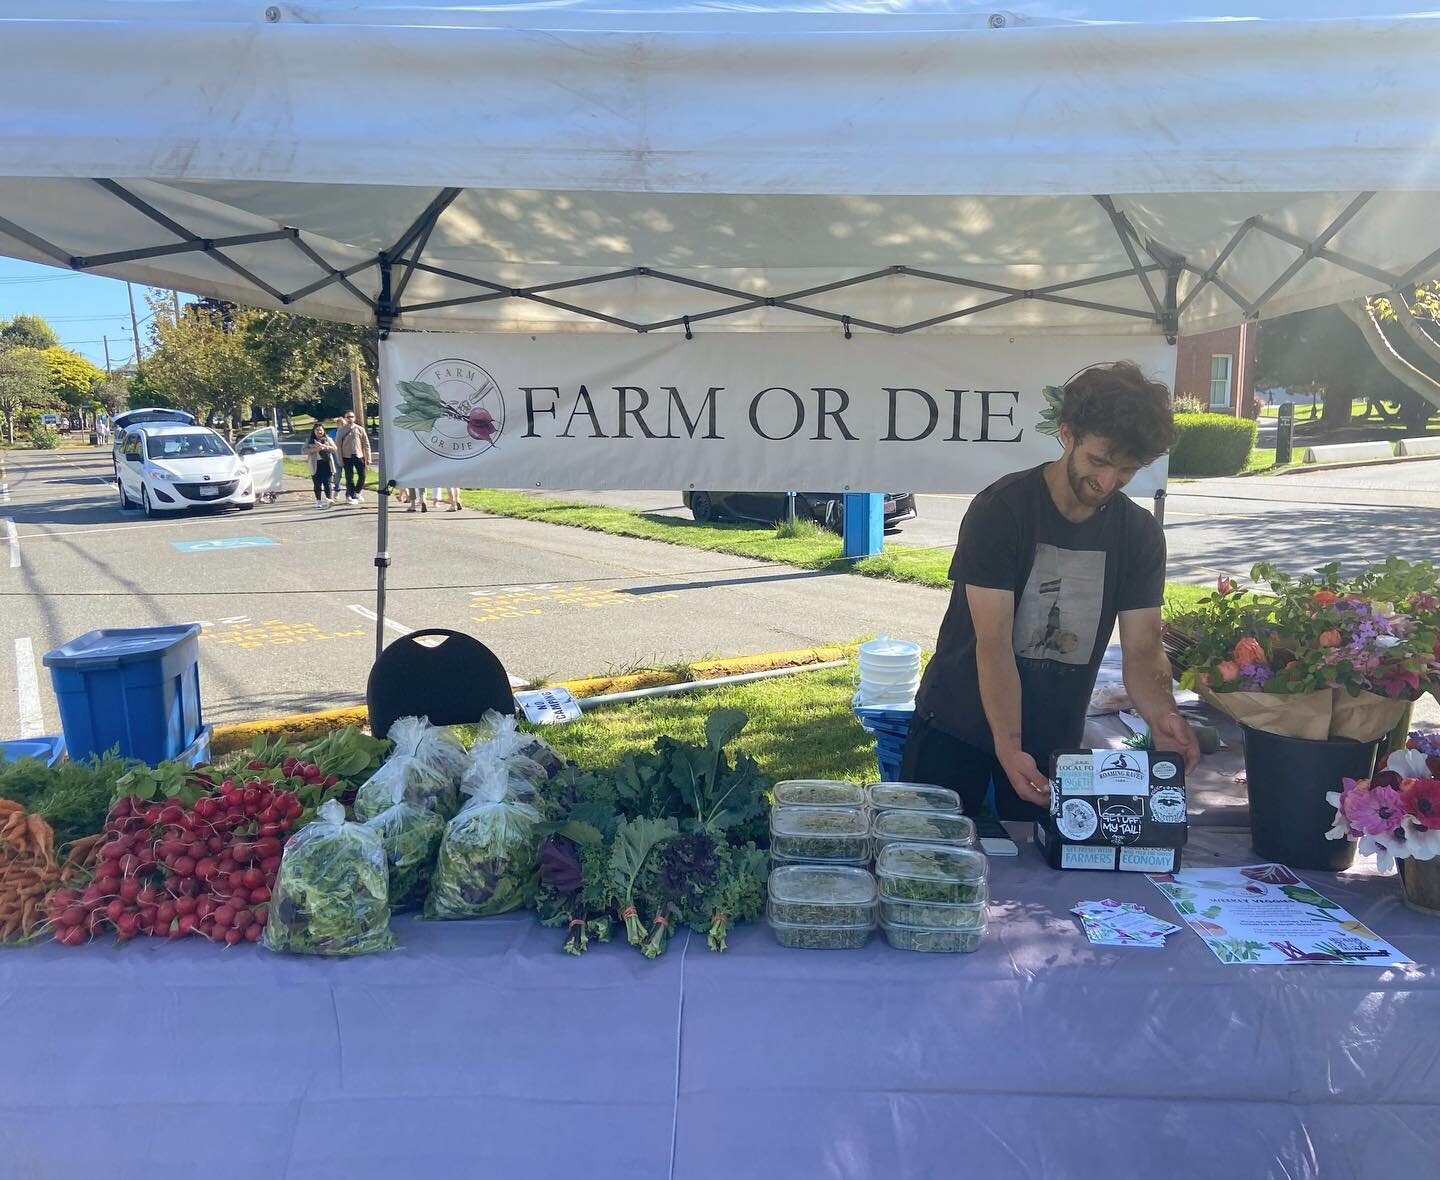 Come check us out at @jamesbaymarket today 9-3PM! 
.
.
.
#farmordie #marketgarden #growfoodnotlawns #youngfarmers #farmstrong #soillife #soilscience #esquimaltfarmersmarket #jamesbaymarket #buybc #farmersmarket #eatlocal #saanich #northsaanich #vanco